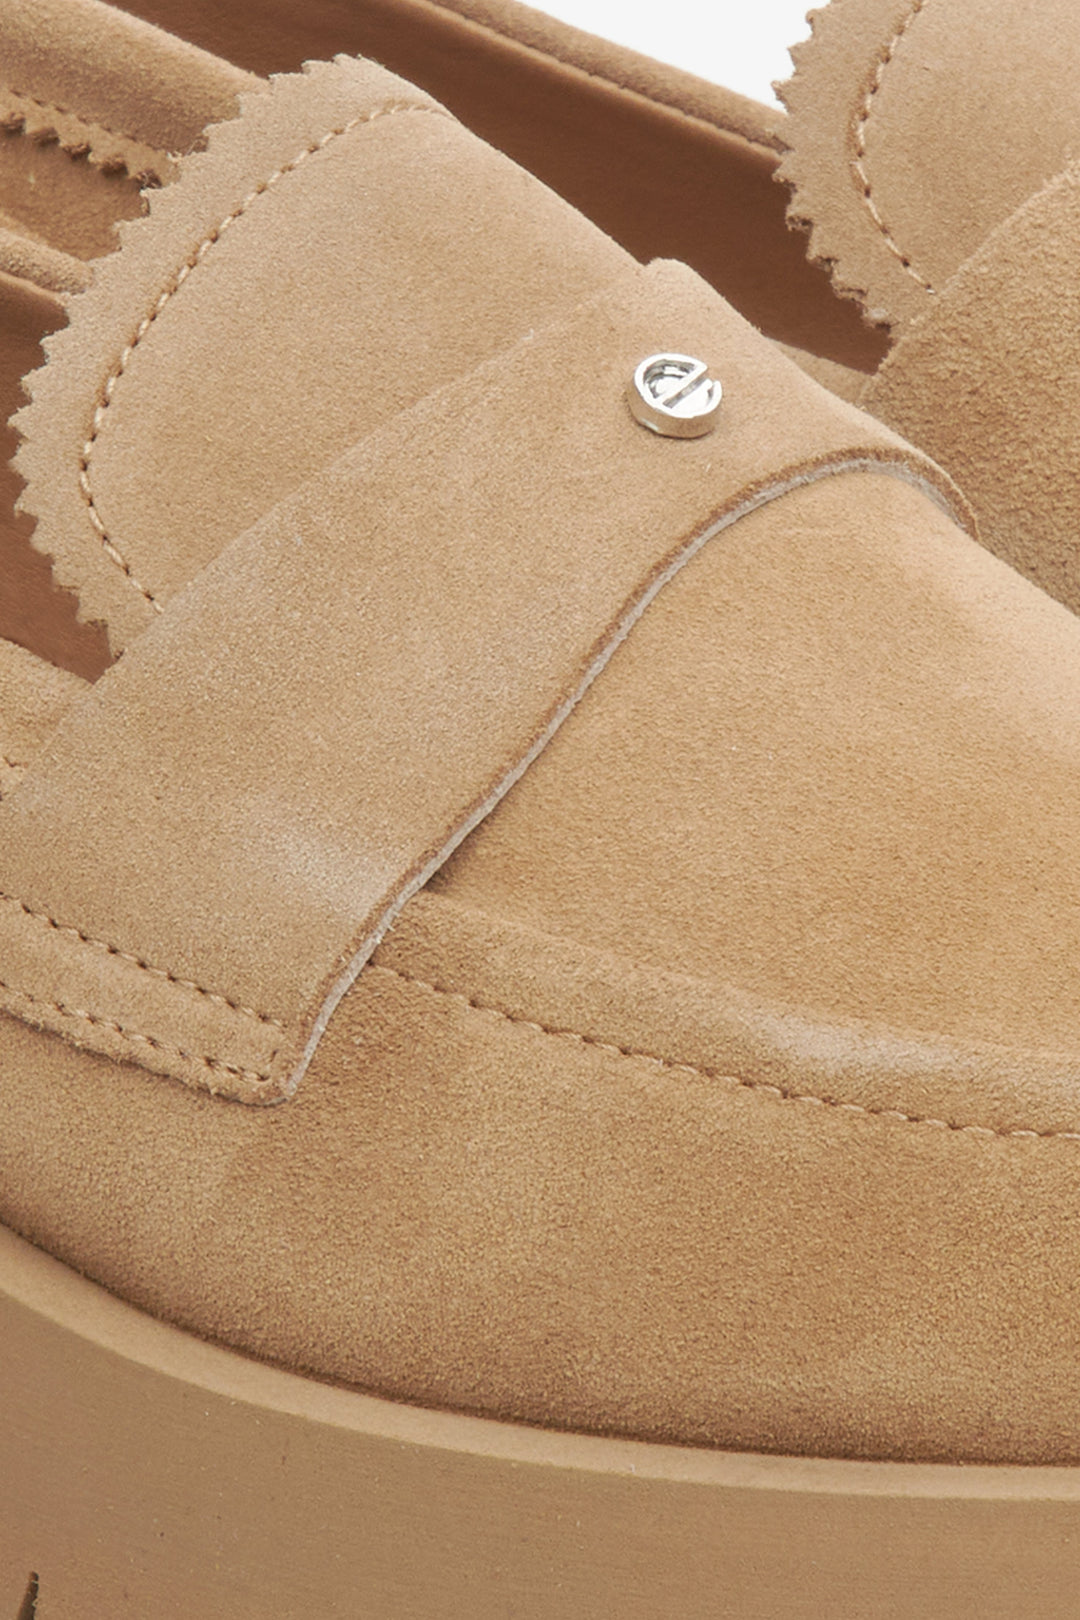 Estro women's loafers in brown, made of genuine velour - close up on details.